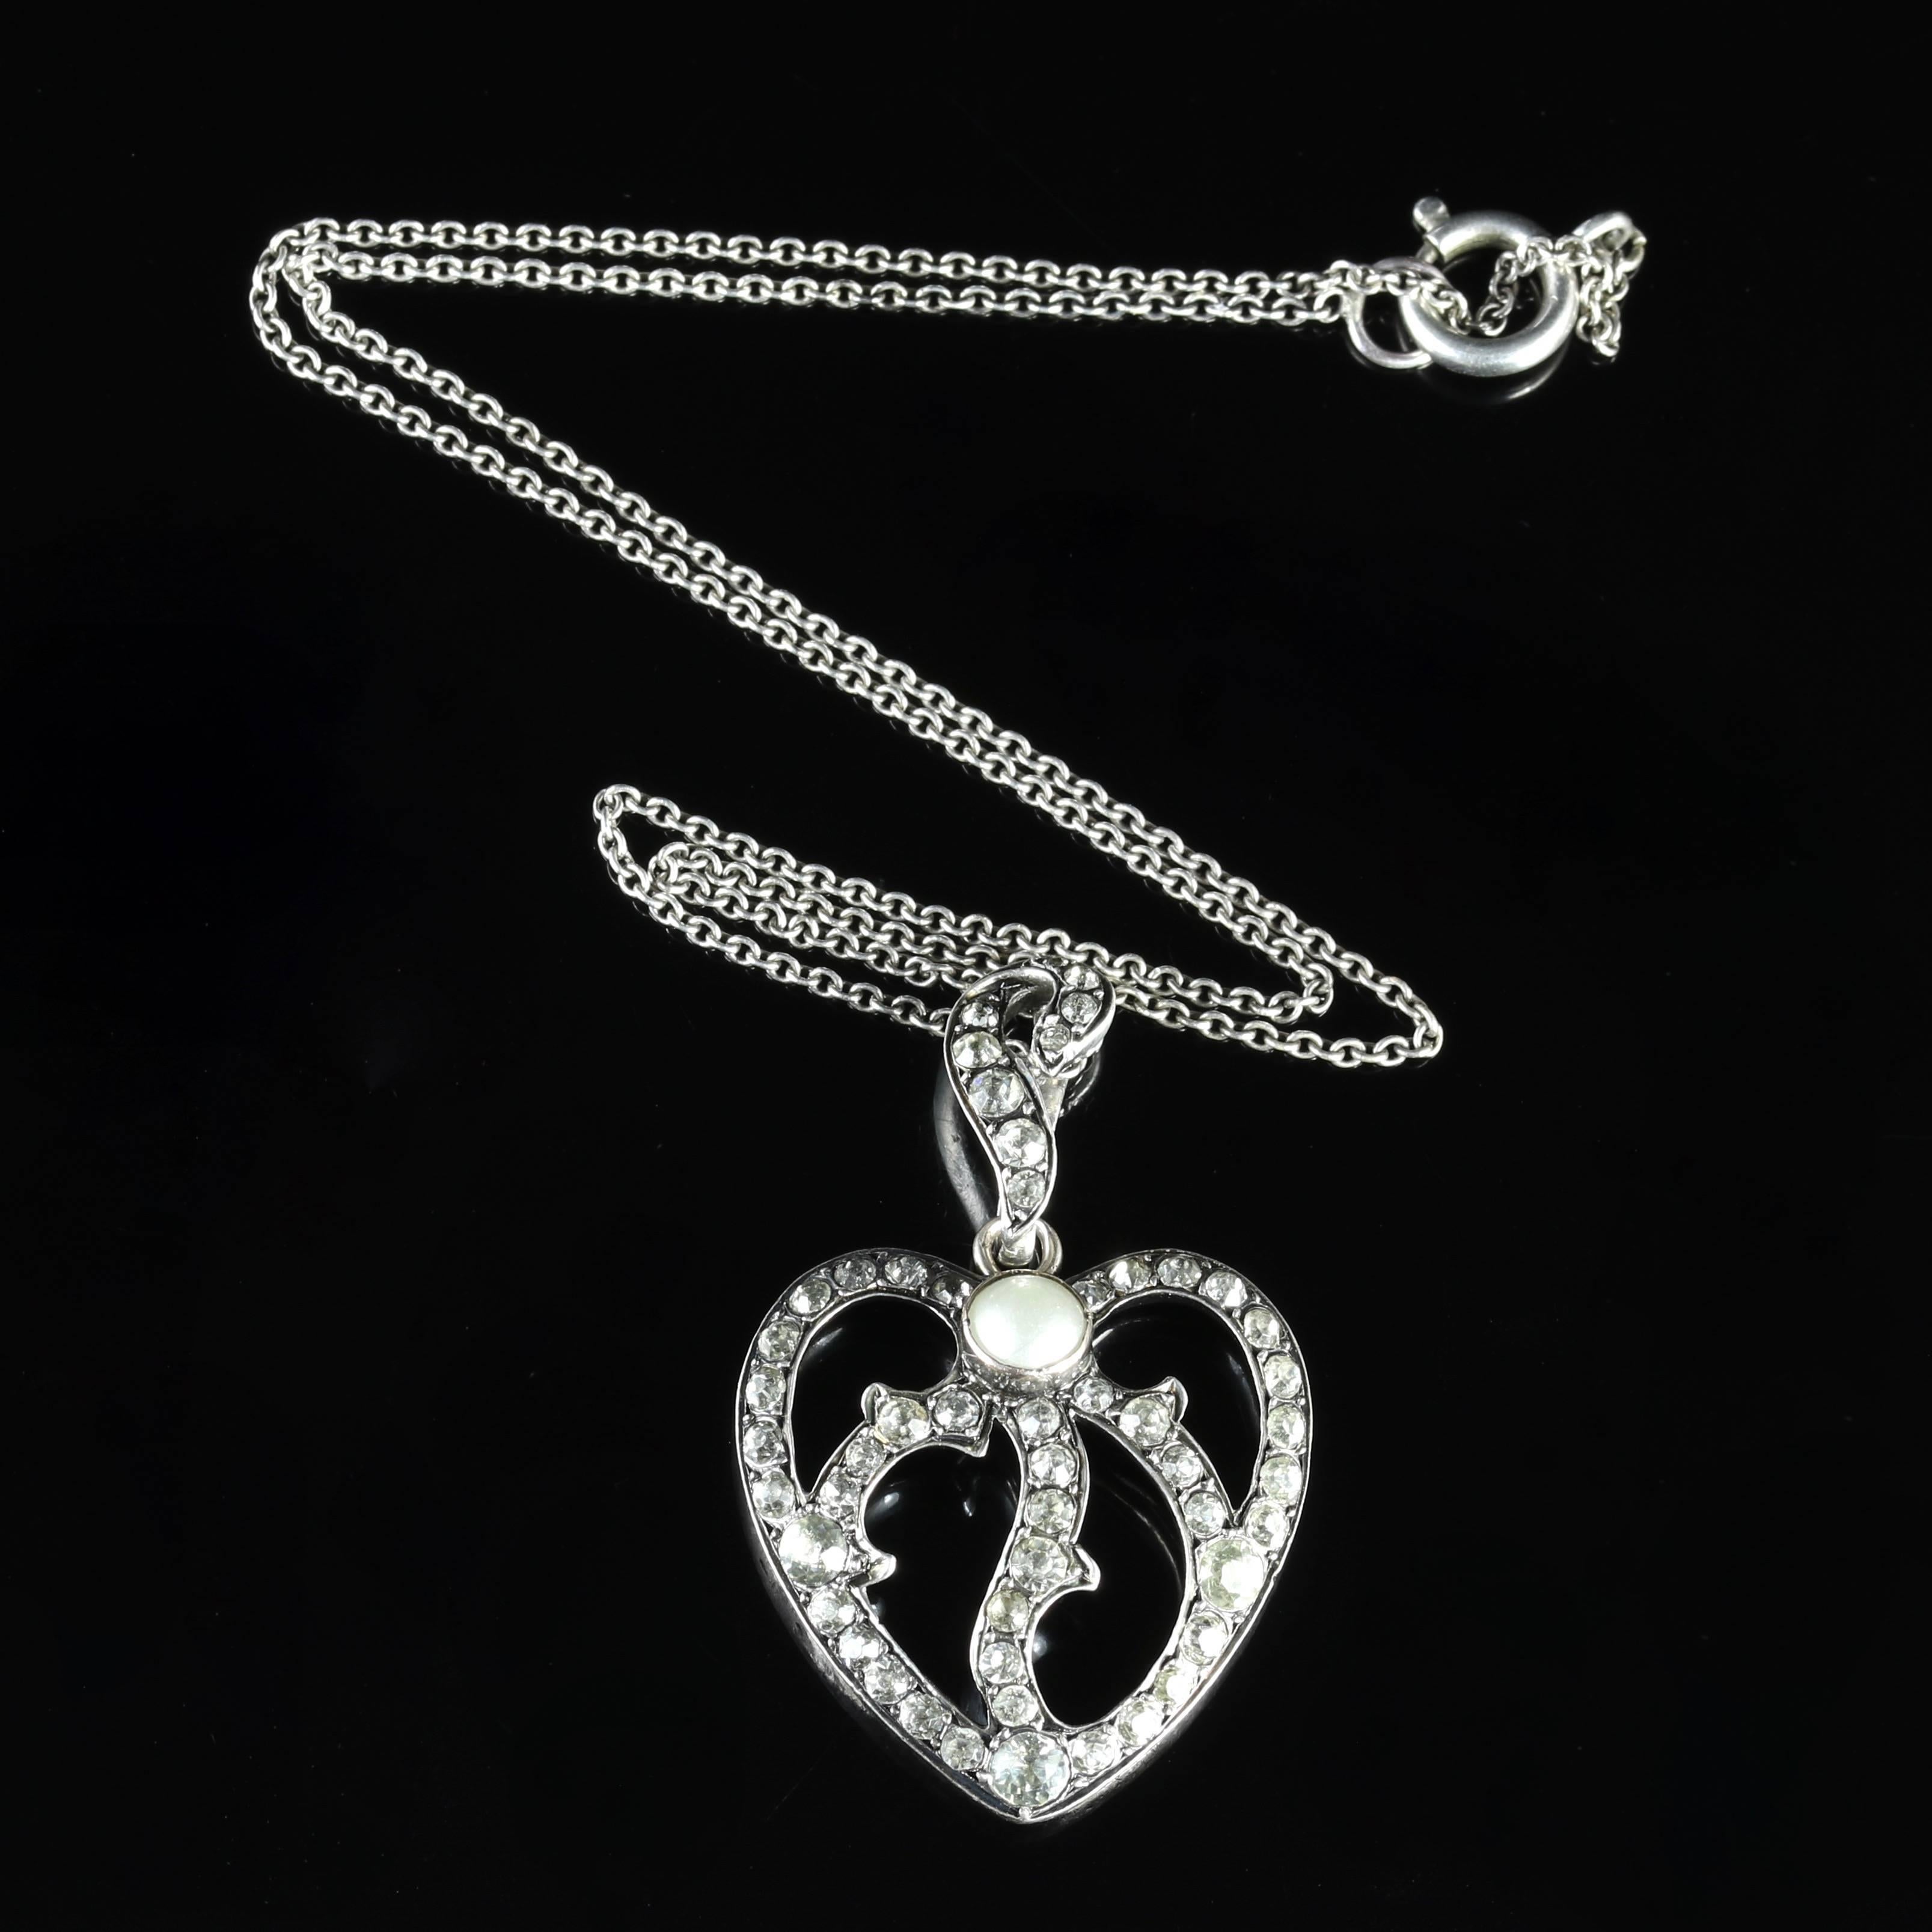 Women's Antique Victorian Silver Heart Paste Pearl Pendant and Necklace